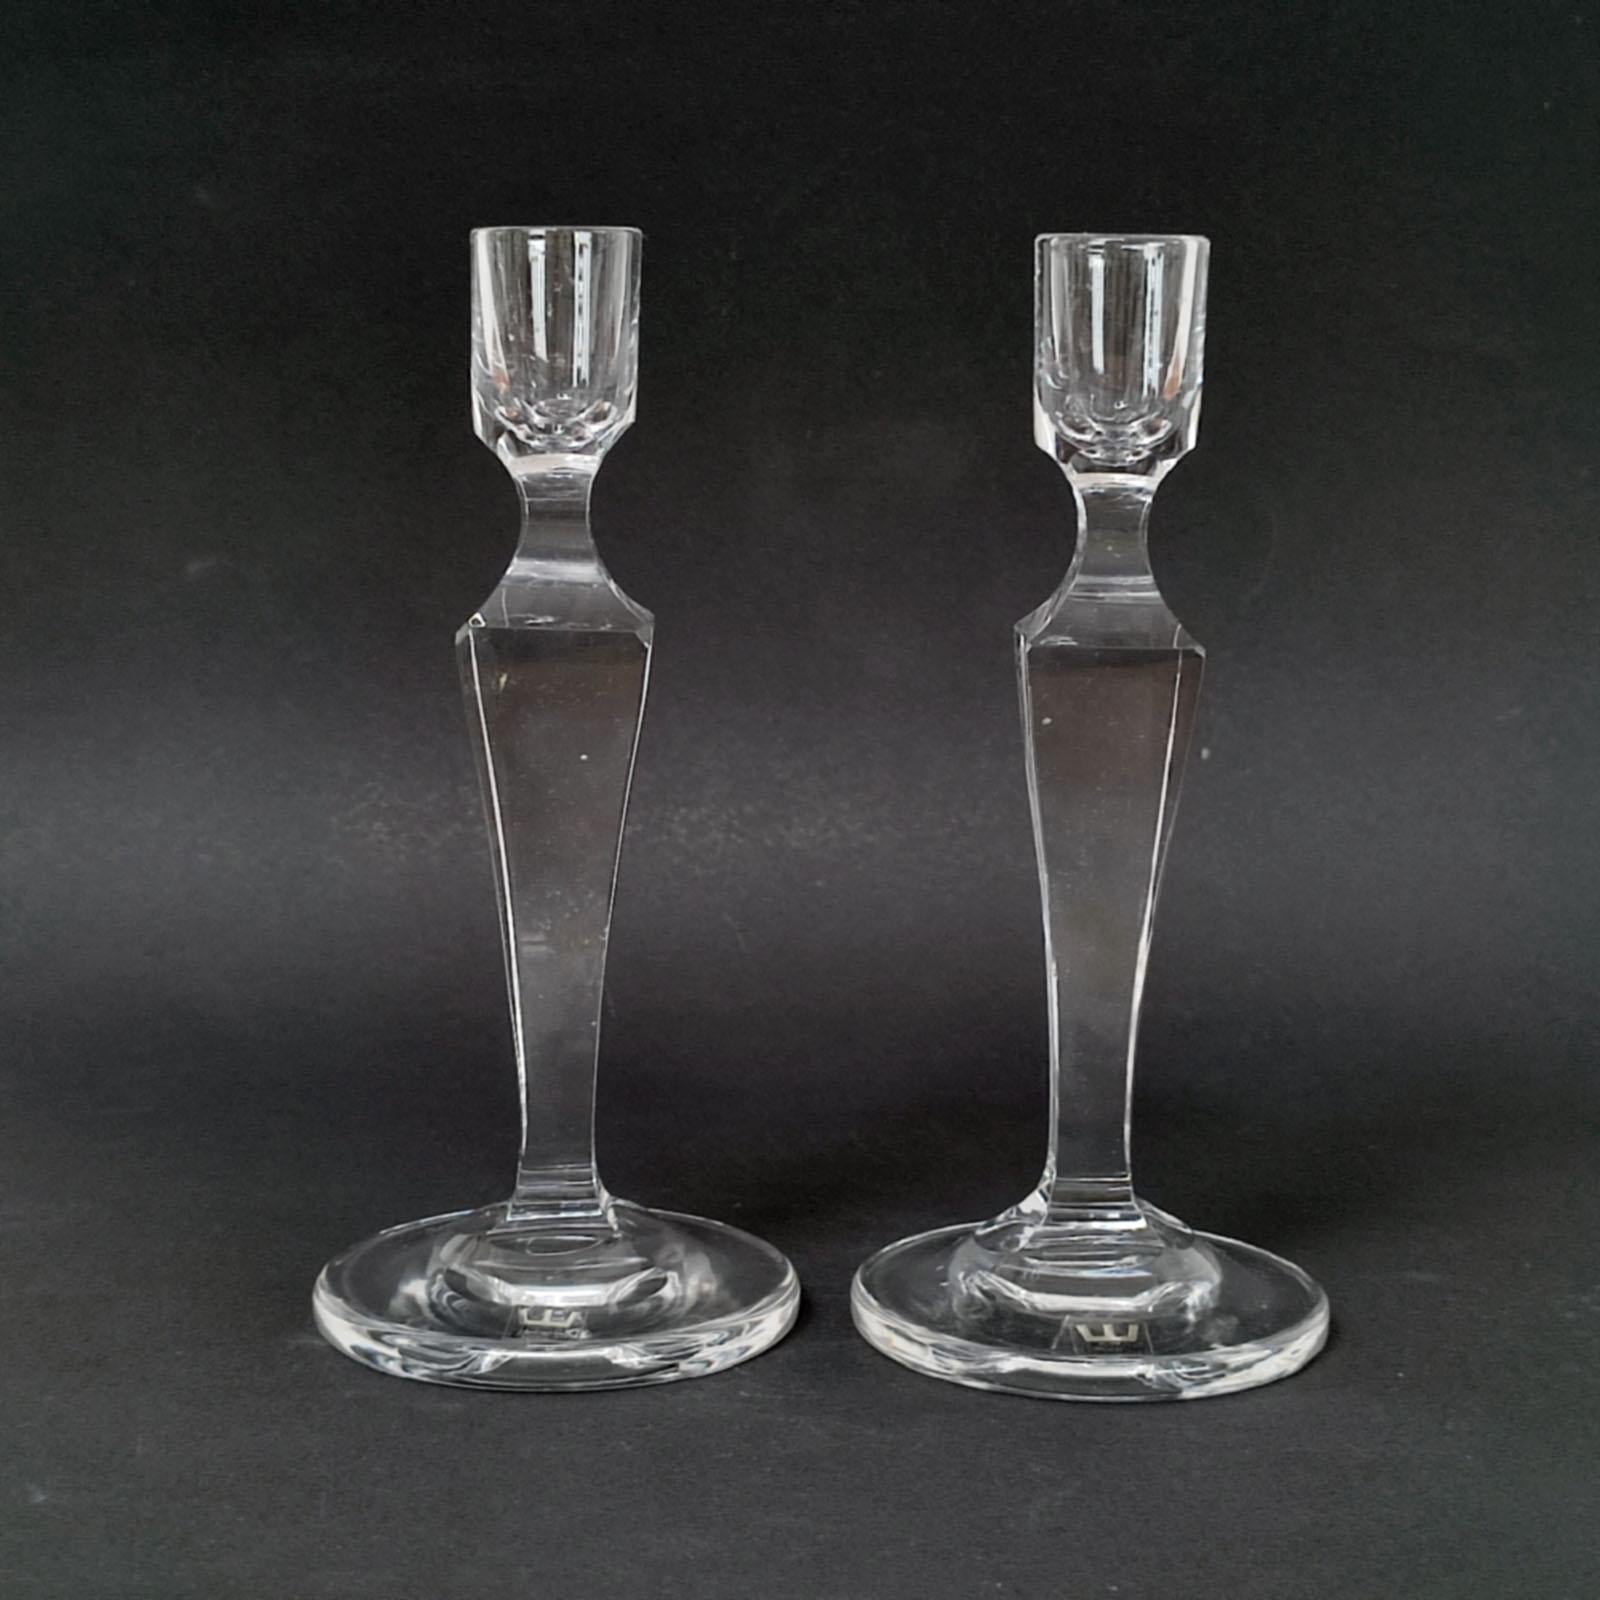 Kosta Boda Vintage Crystal Cut Candle Holders In Excellent Condition For Sale In Bochum, NRW